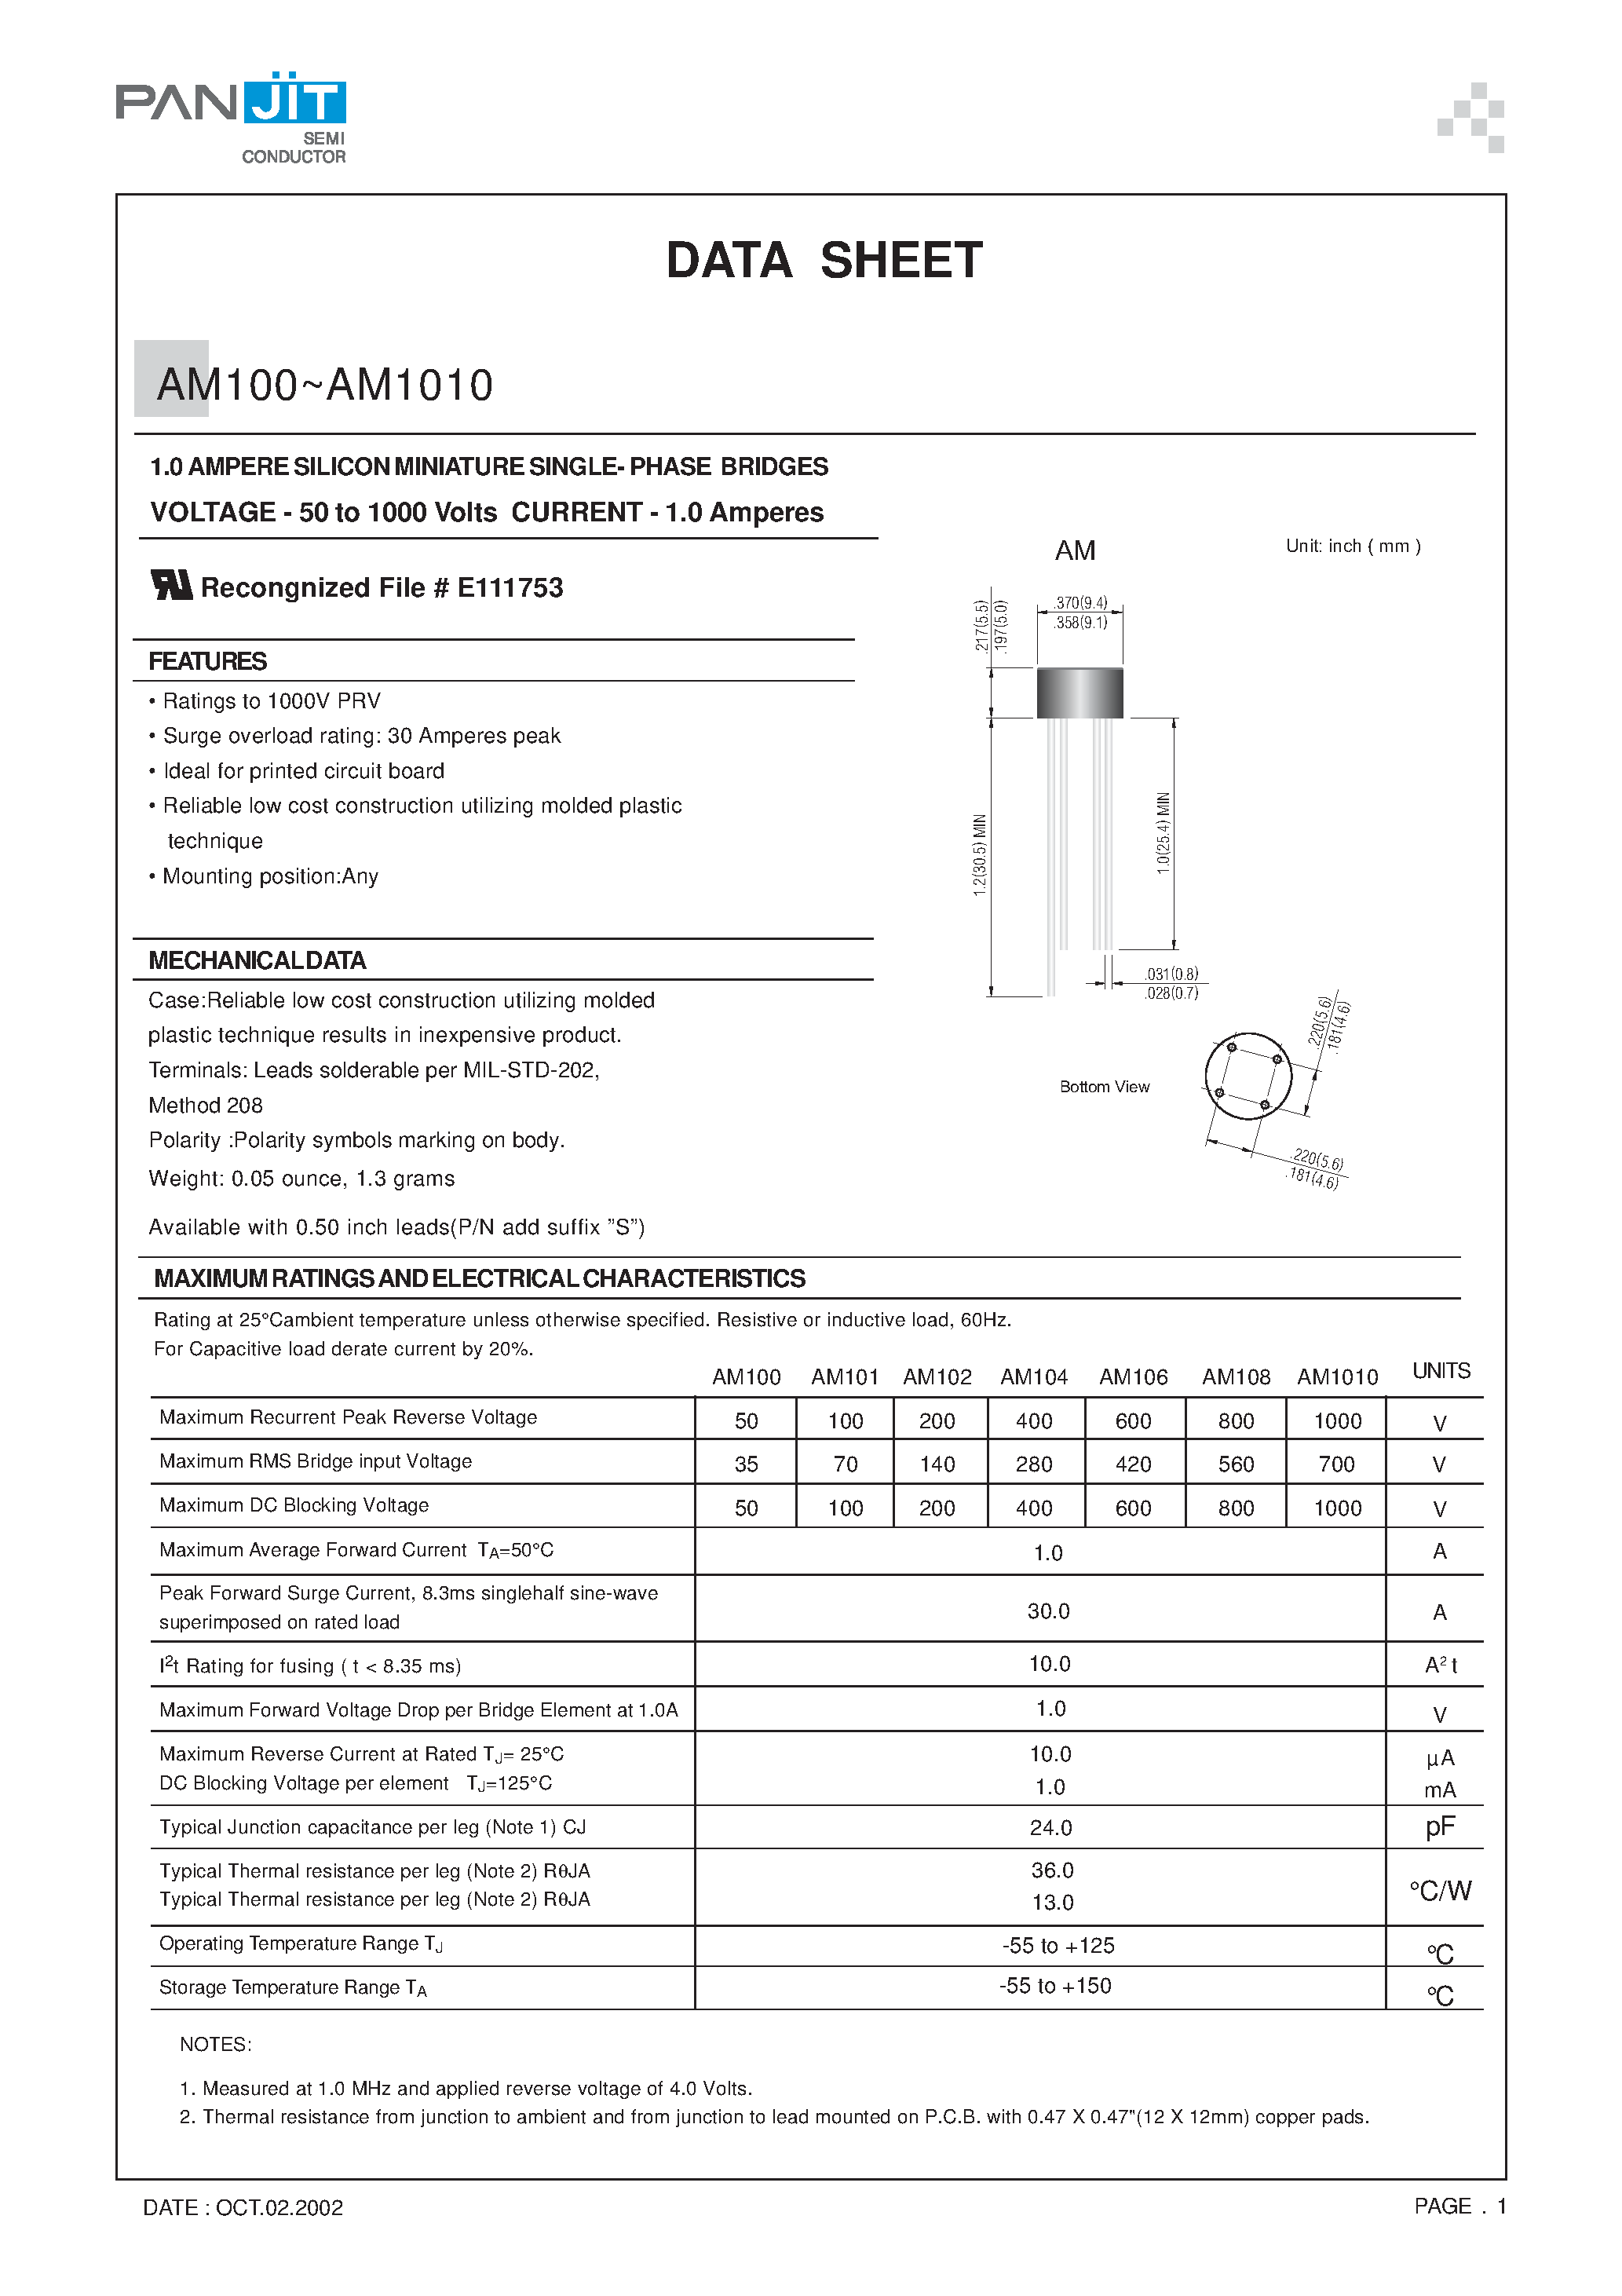 Datasheet AM1010 - 1.0 AMPERE SILICON MINIATURE SINGLE- PHASE BRIDGES(VOLTAGE - 50 to 1000 Volts CURRENT - 1.0 Amperes) page 1